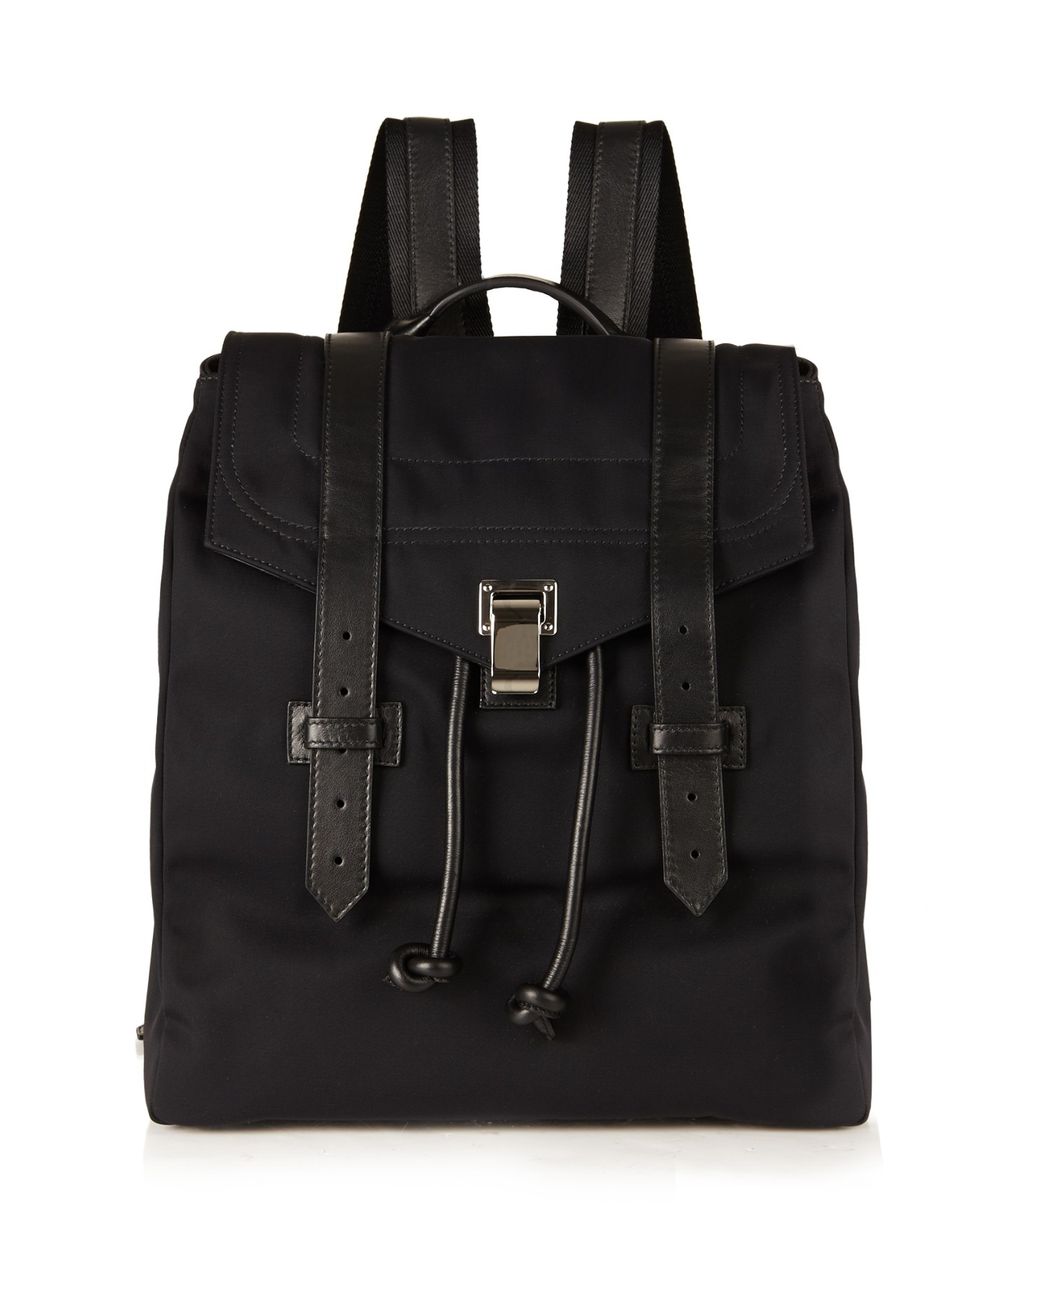 Proenza Schouler Ps1 Leather-trim Nylon Backpack in Black | Lyst